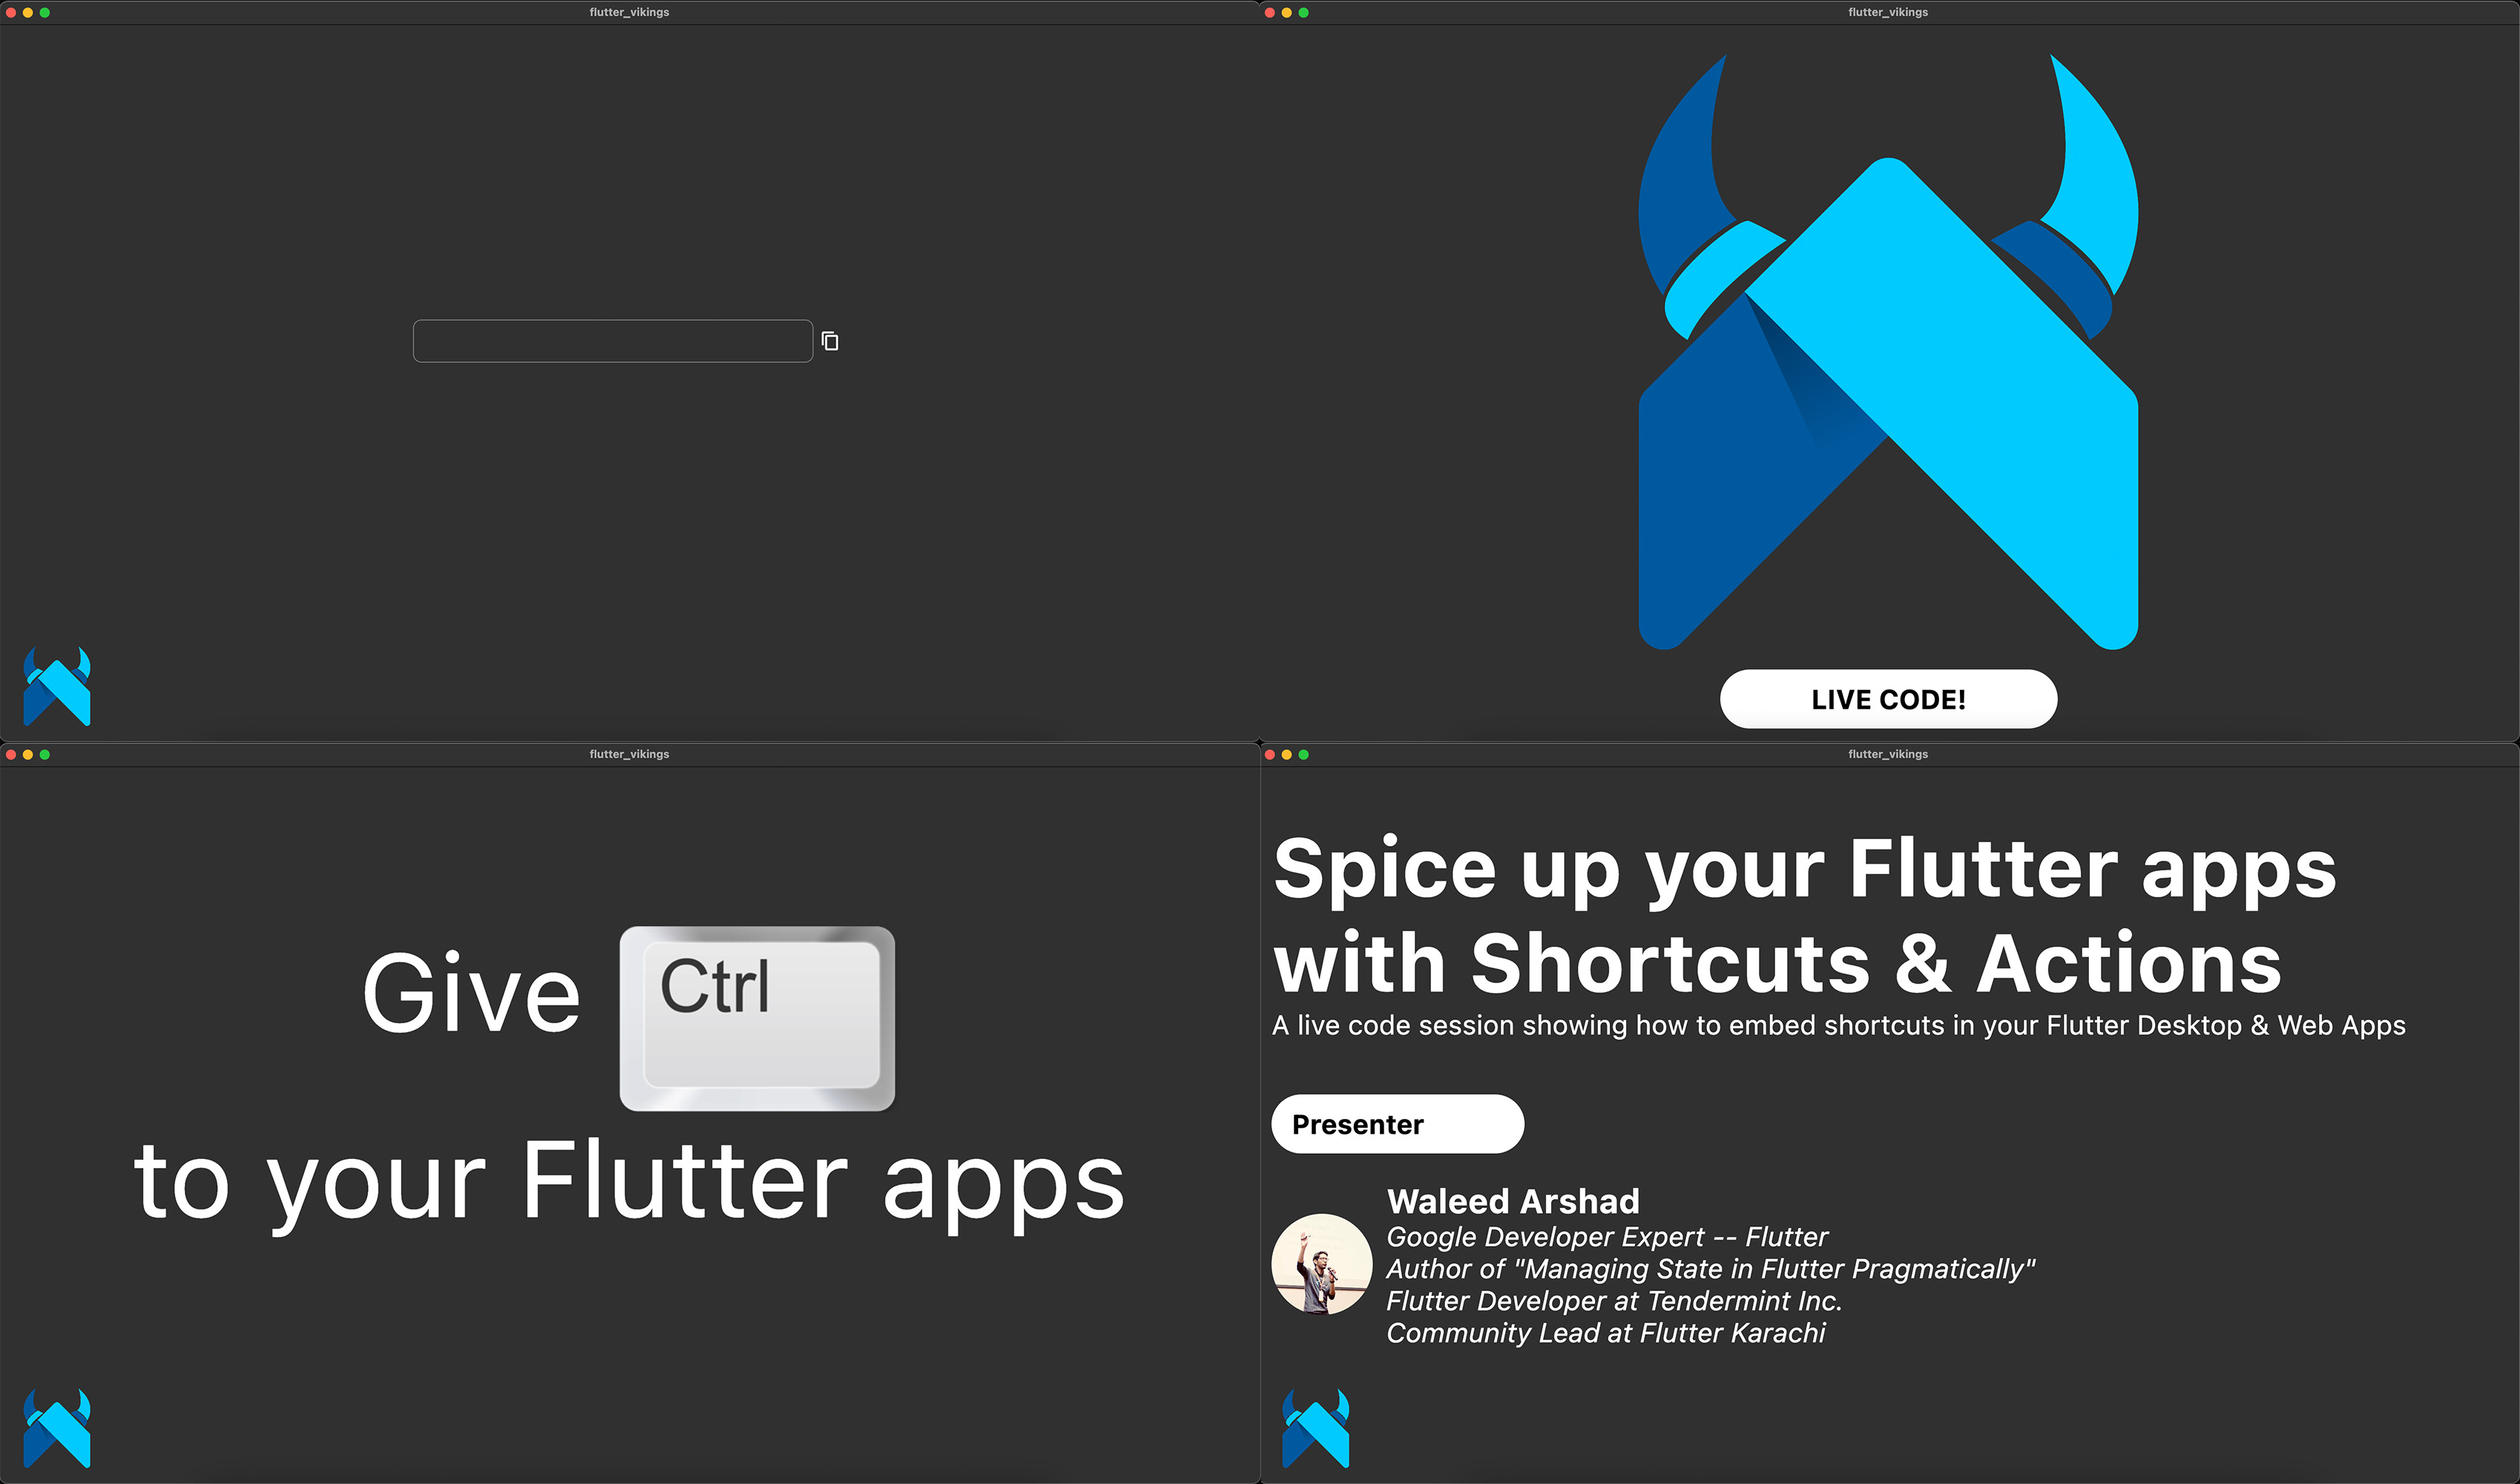 Spice up your Flutter Desktop/Web apps with Shortcuts and Actions